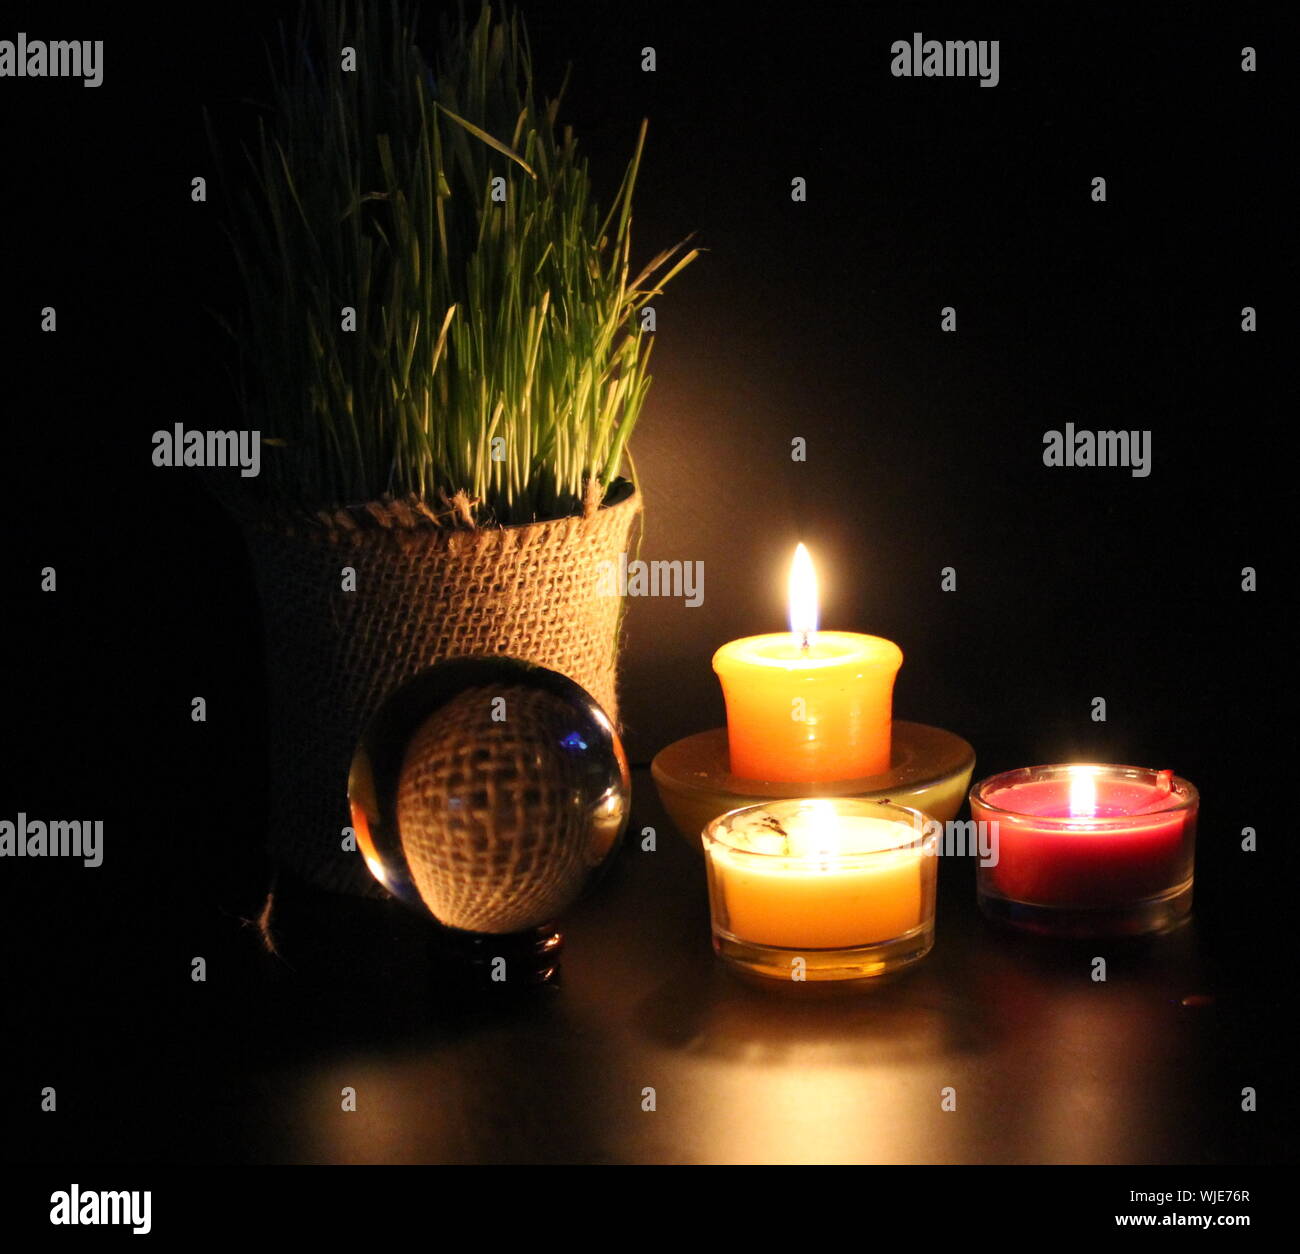 Lit Tea Light Candles By Crystal Ball And Potted Plant On Table Stock Photo  - Alamy